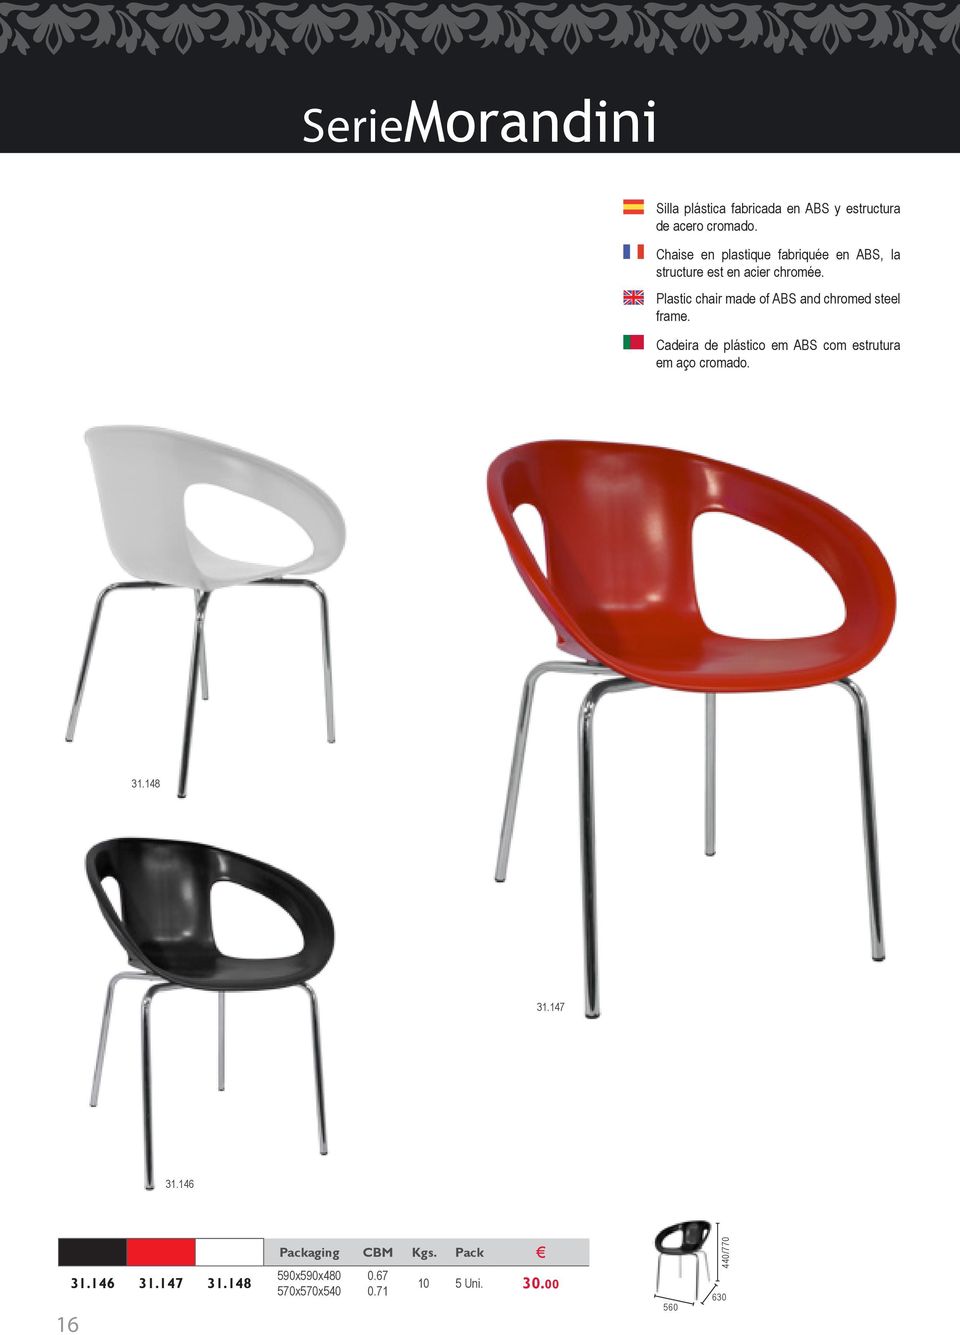 Plastic chair made of ABS and chromed steel frame.